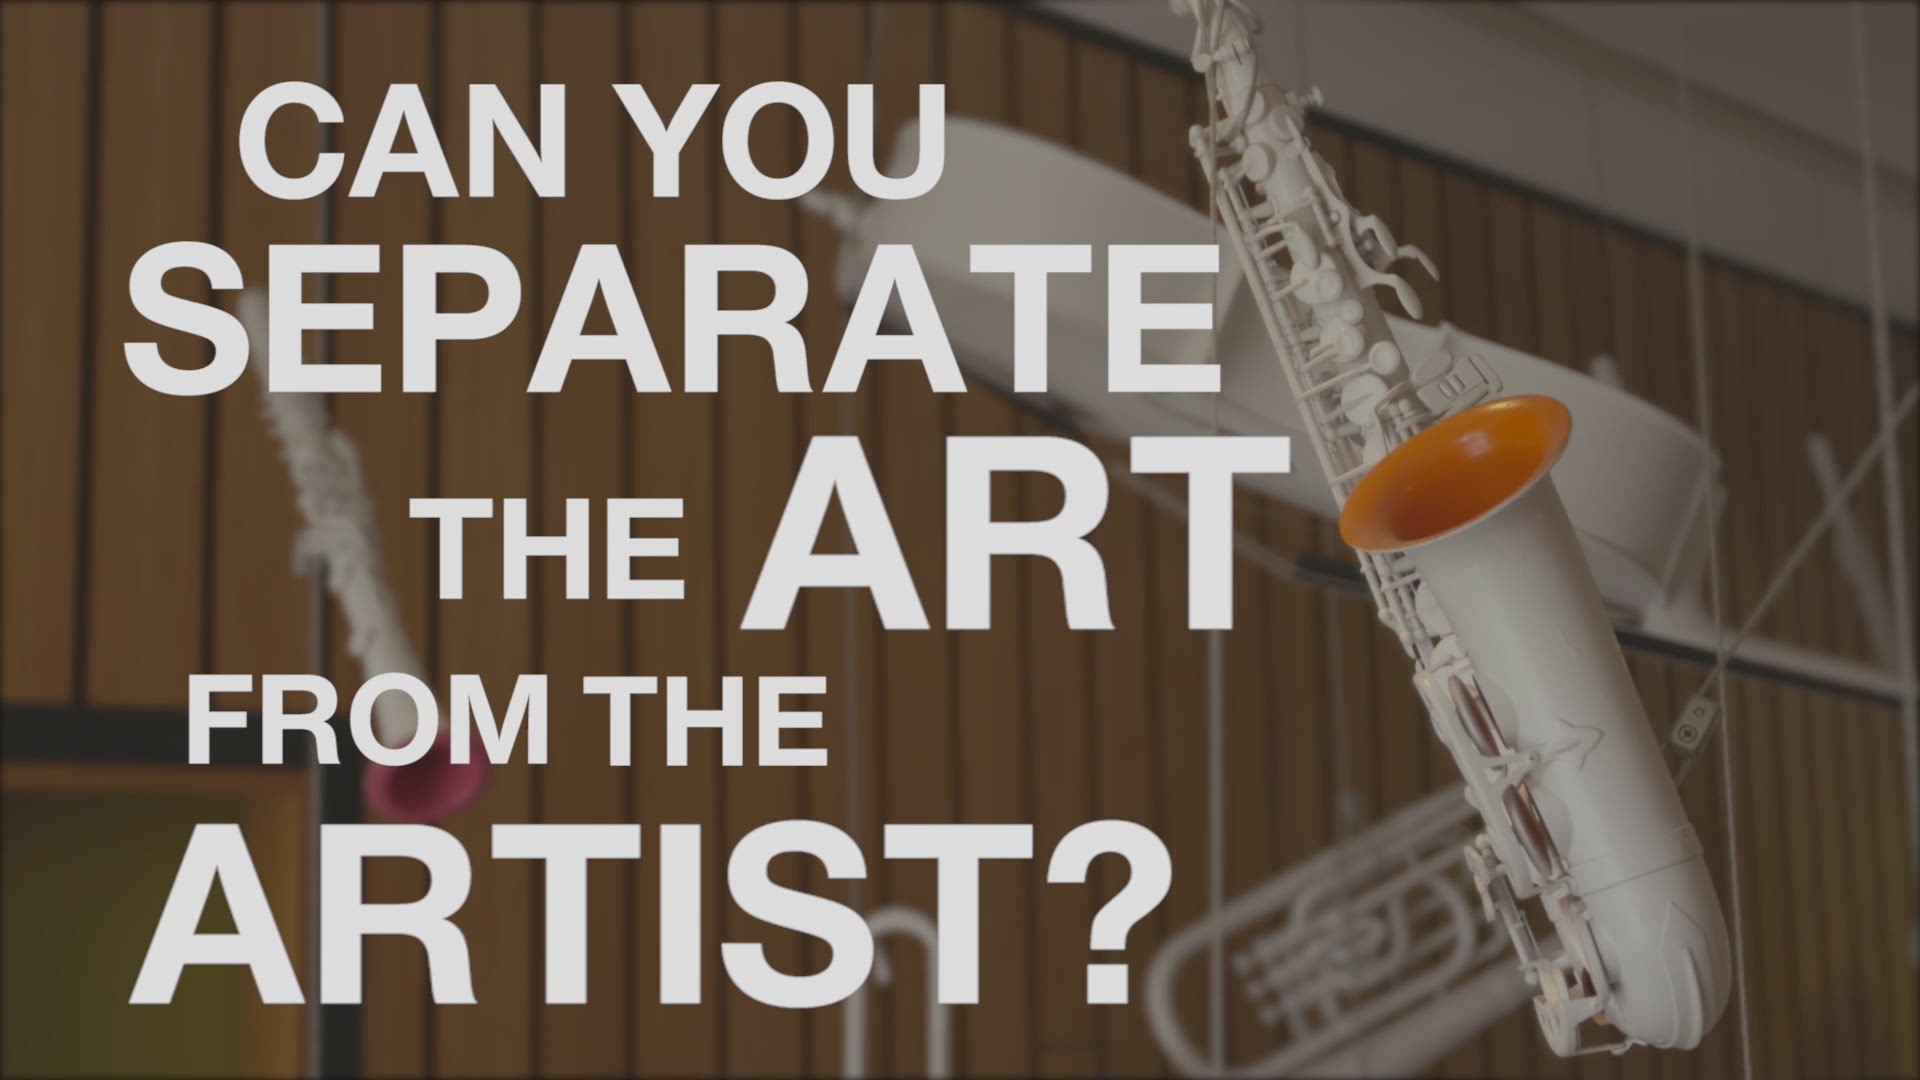 Can you separate the art from the artist?